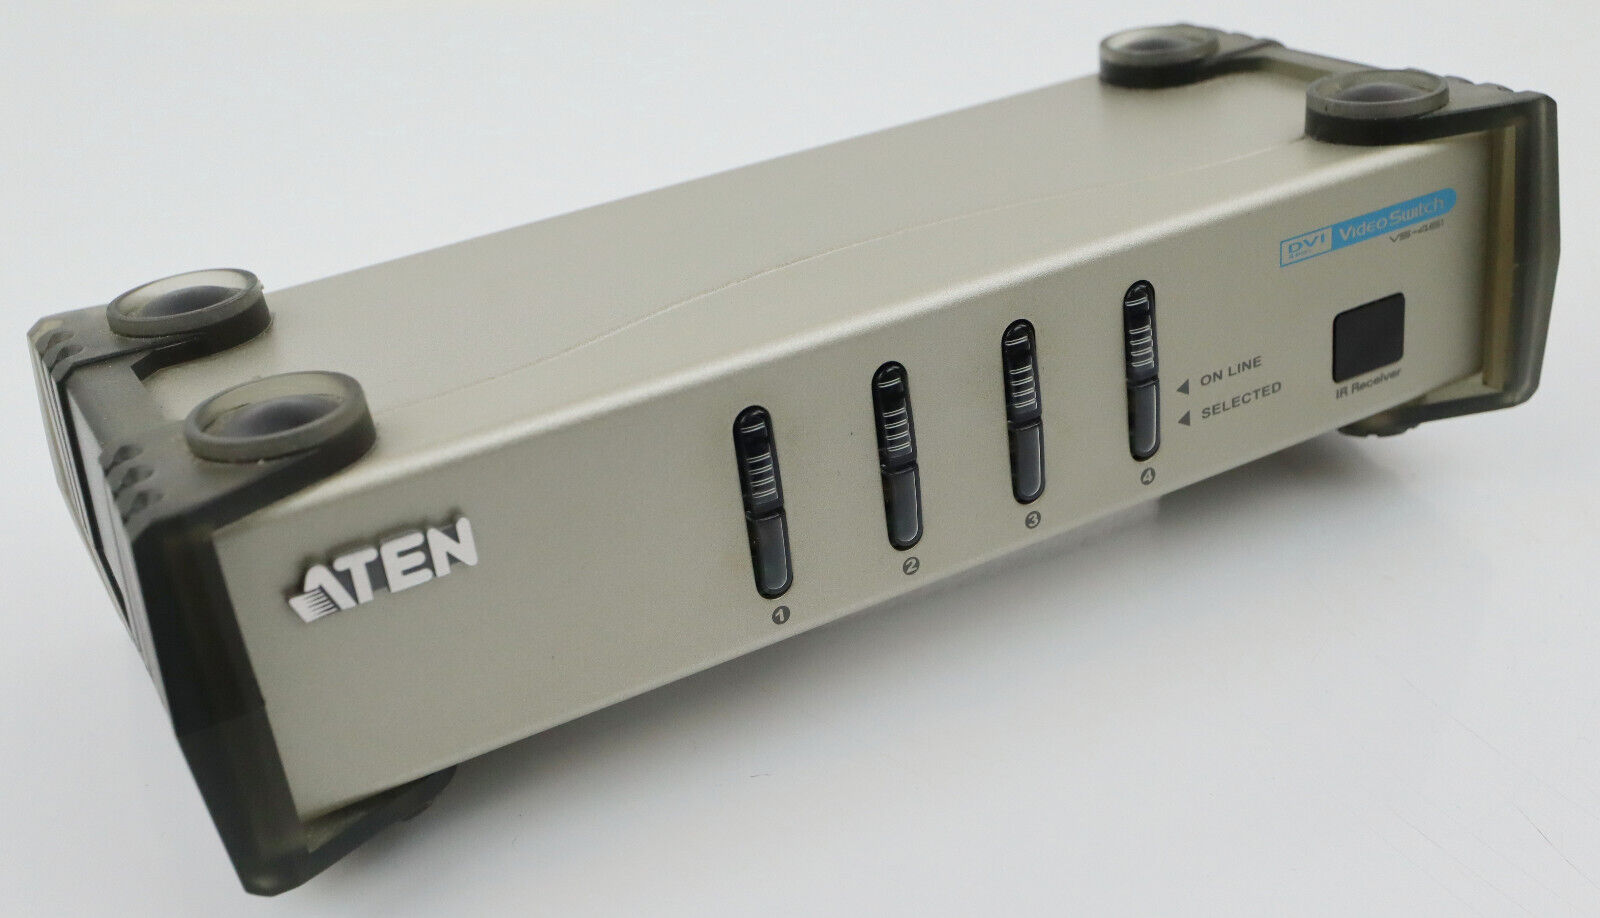 ATEN VS-461 4-Port DVI/Audio Port Switch - Cordless with Power Supply Only